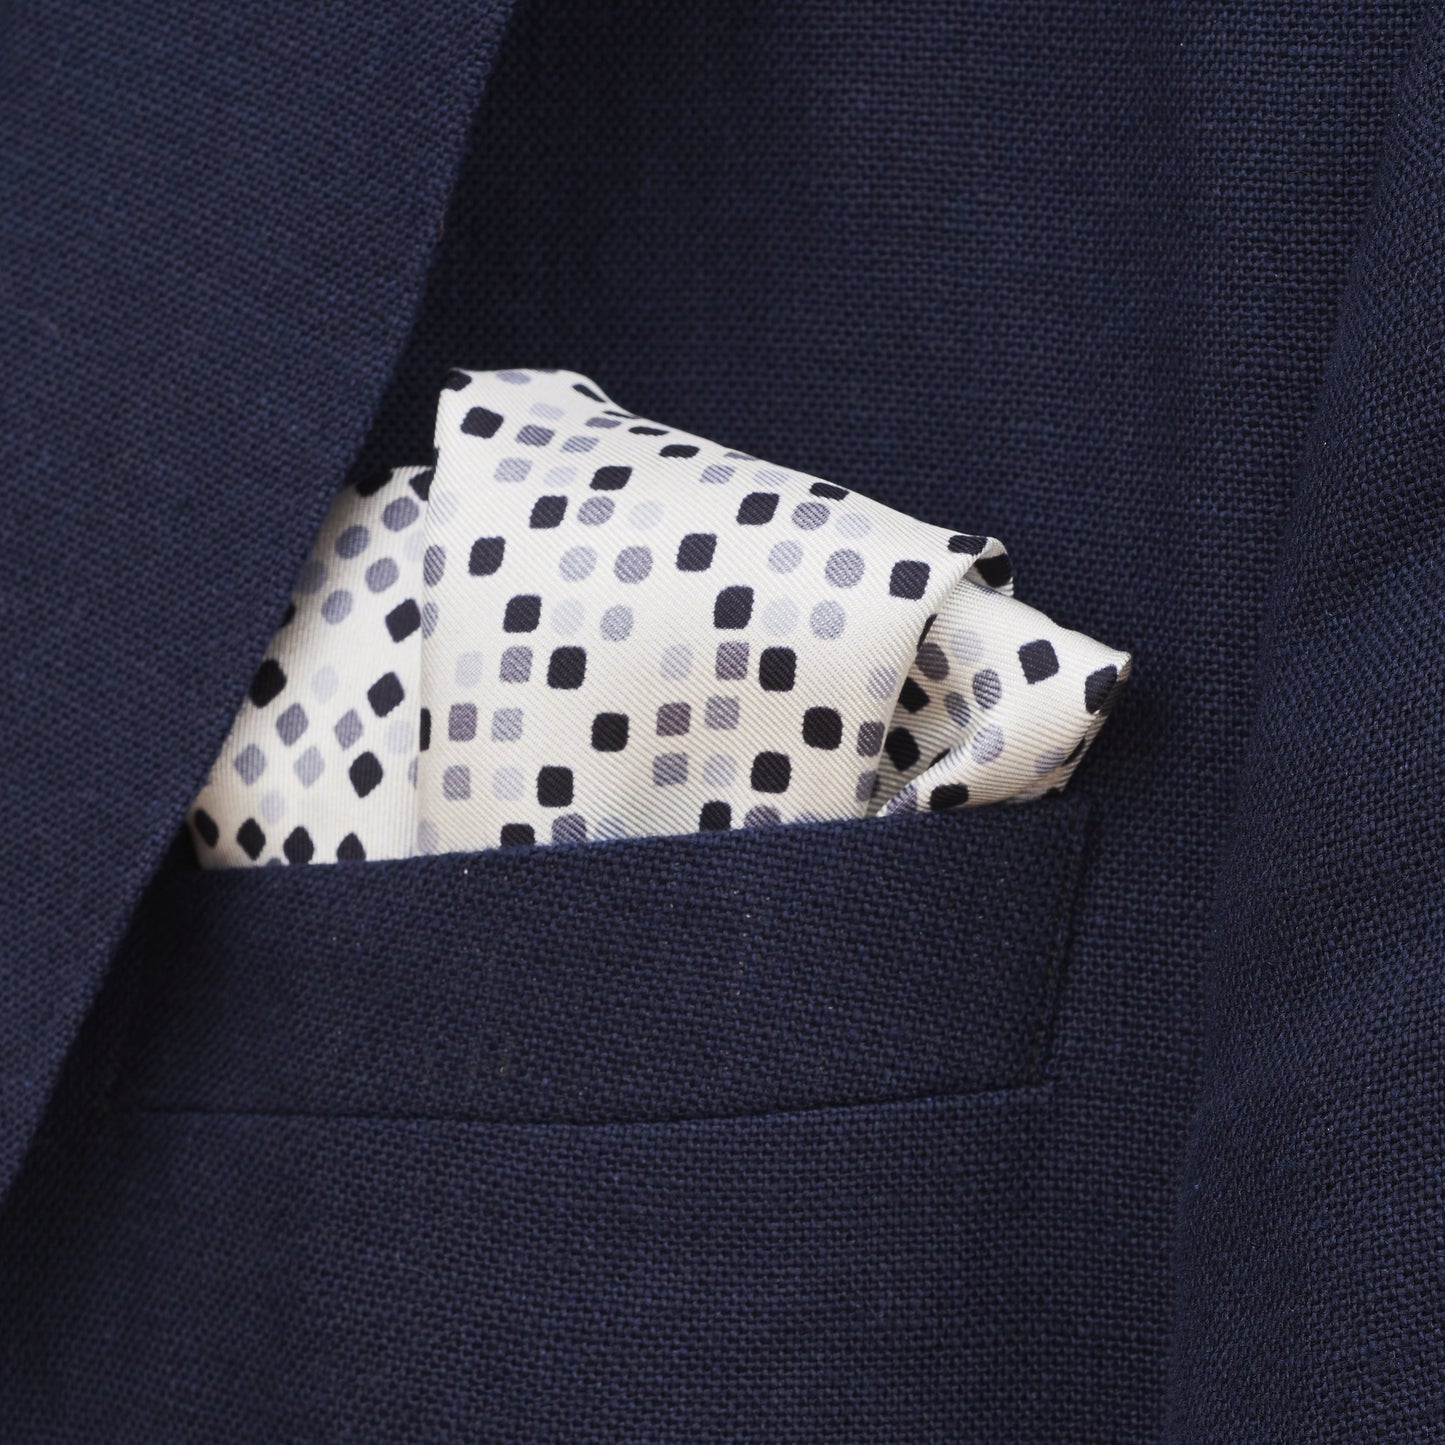 luxury pocket square pure silk made-in-italy hand rollled edges art-deco geometric inspired